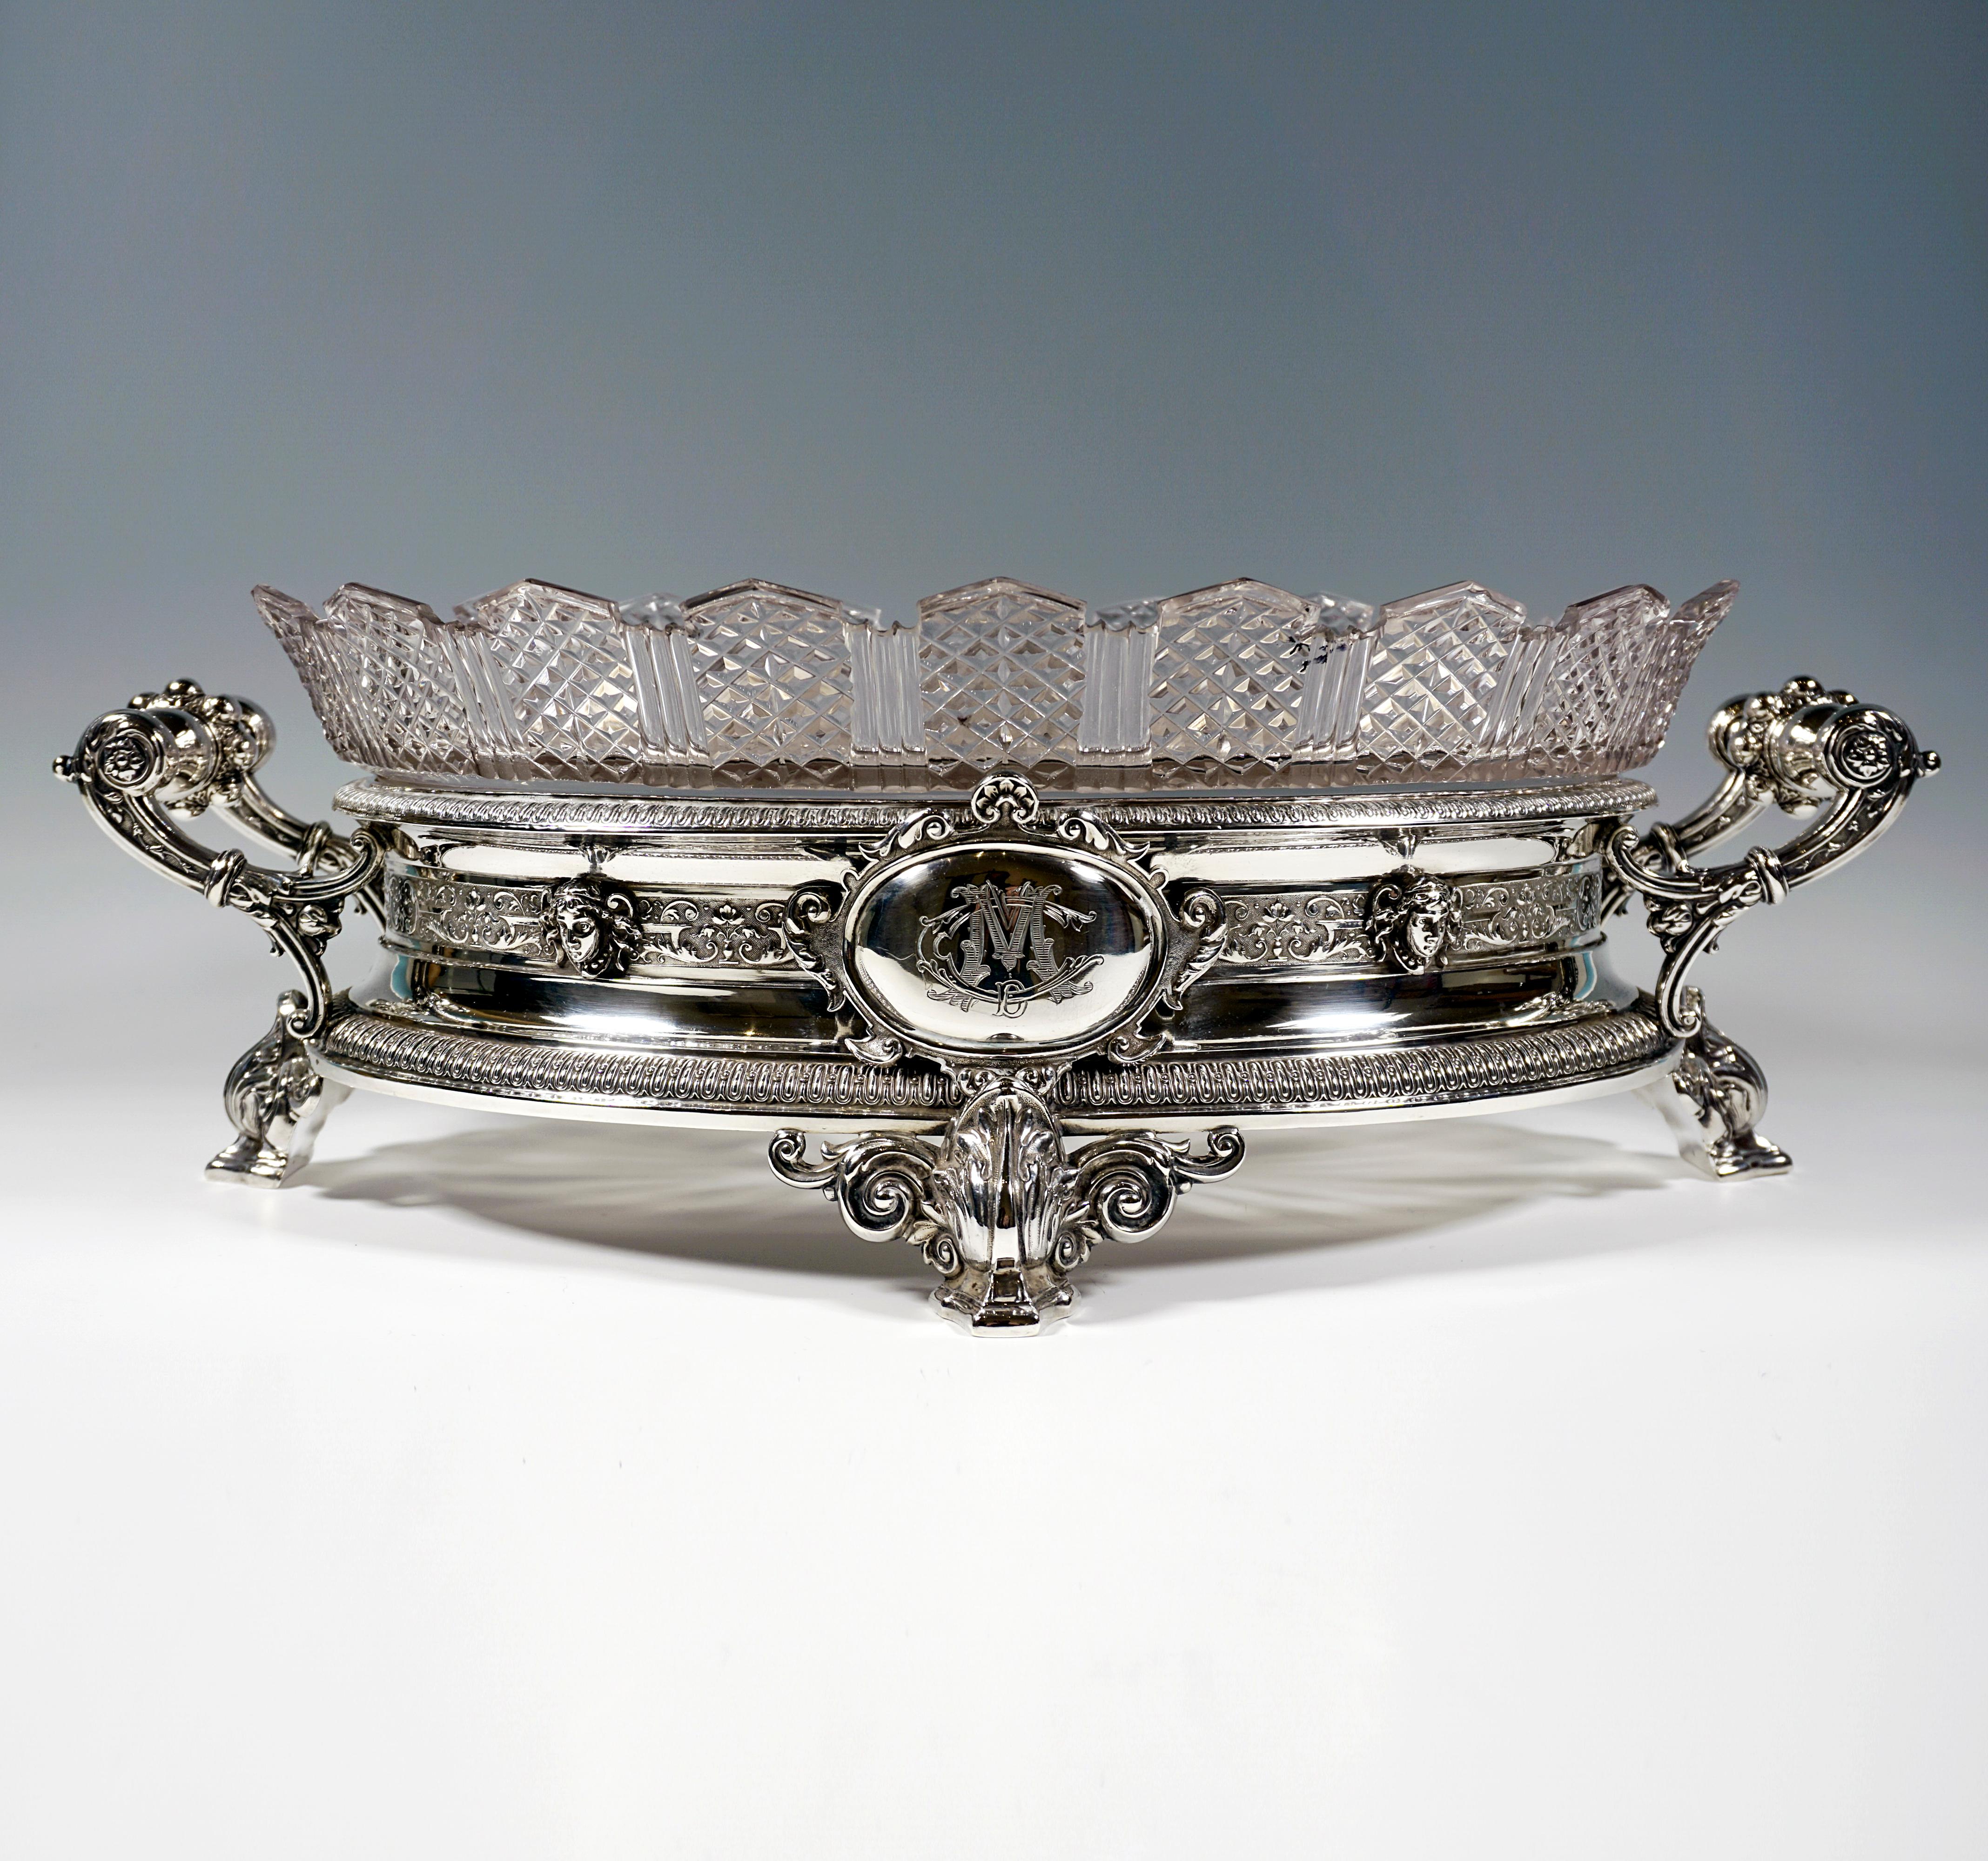 Large festive silver jardinière over oval ground plan, standing on four flared feet with volute decoration and foliate overlays, the body of the vessel bordered on the upper and lower rims by surrounding bands with chased bar decoration, in the